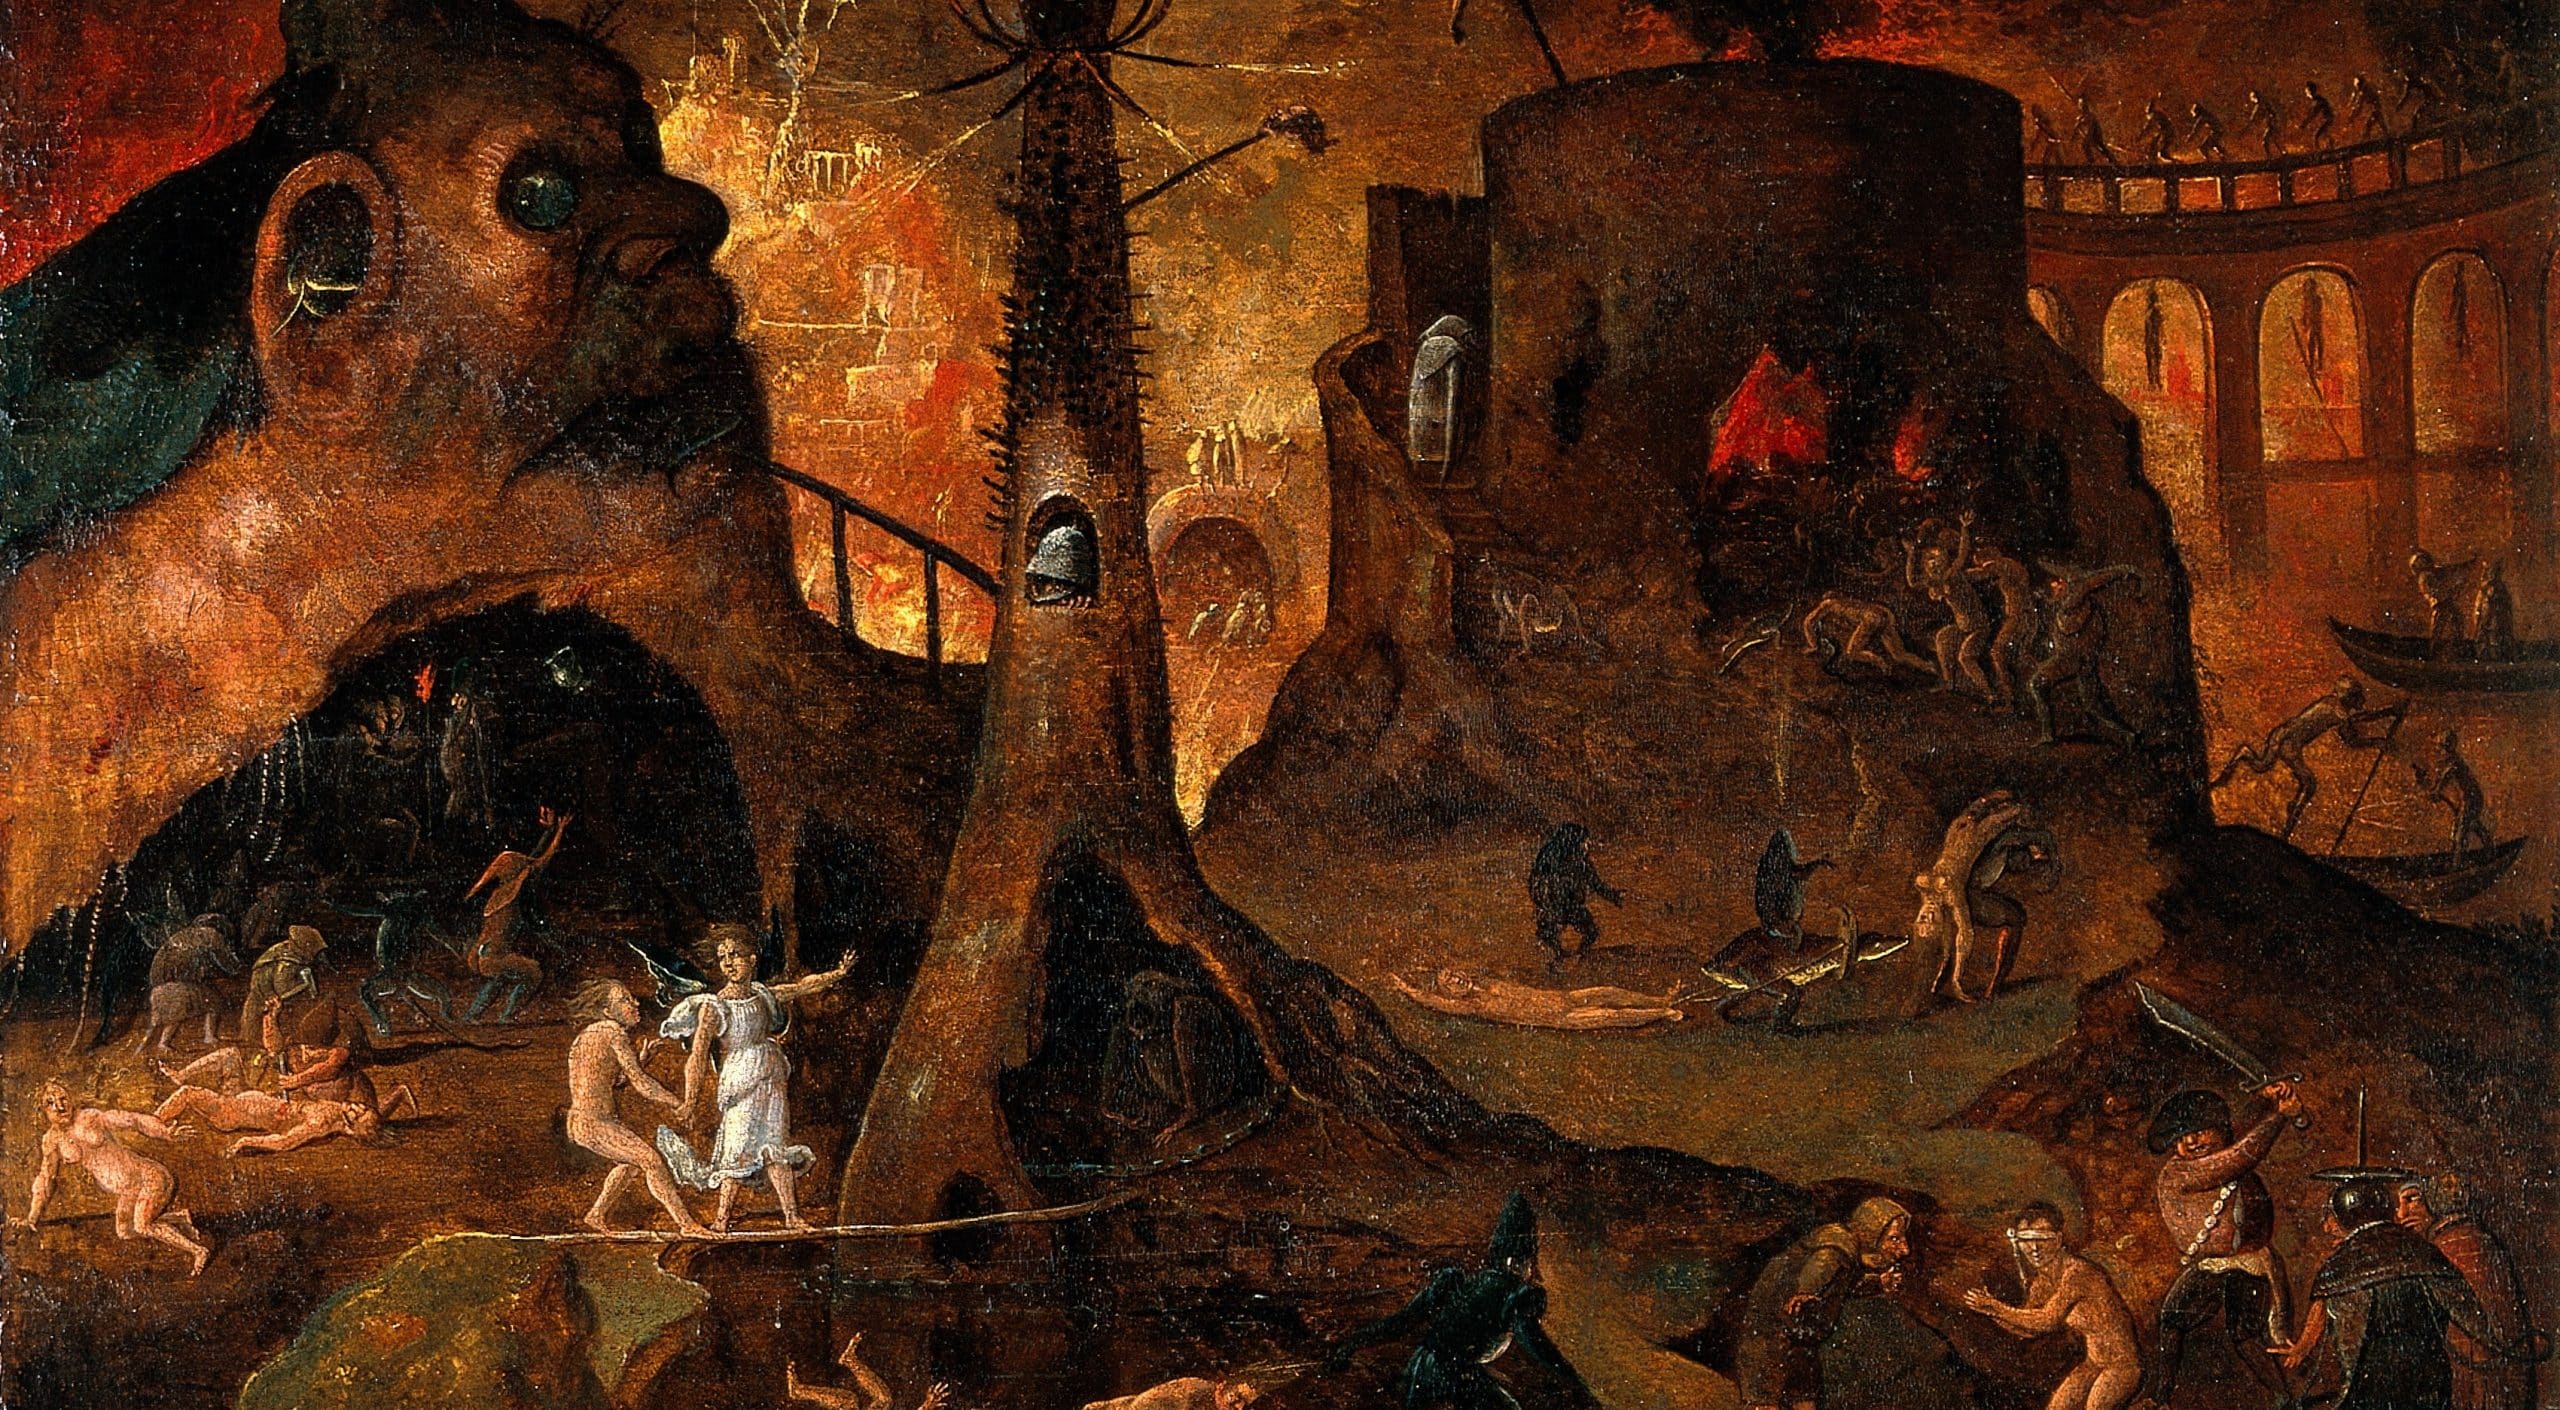 A follower of Hieronymus Bosch, “An Angel Leading a Soul into Hell” (16th century)